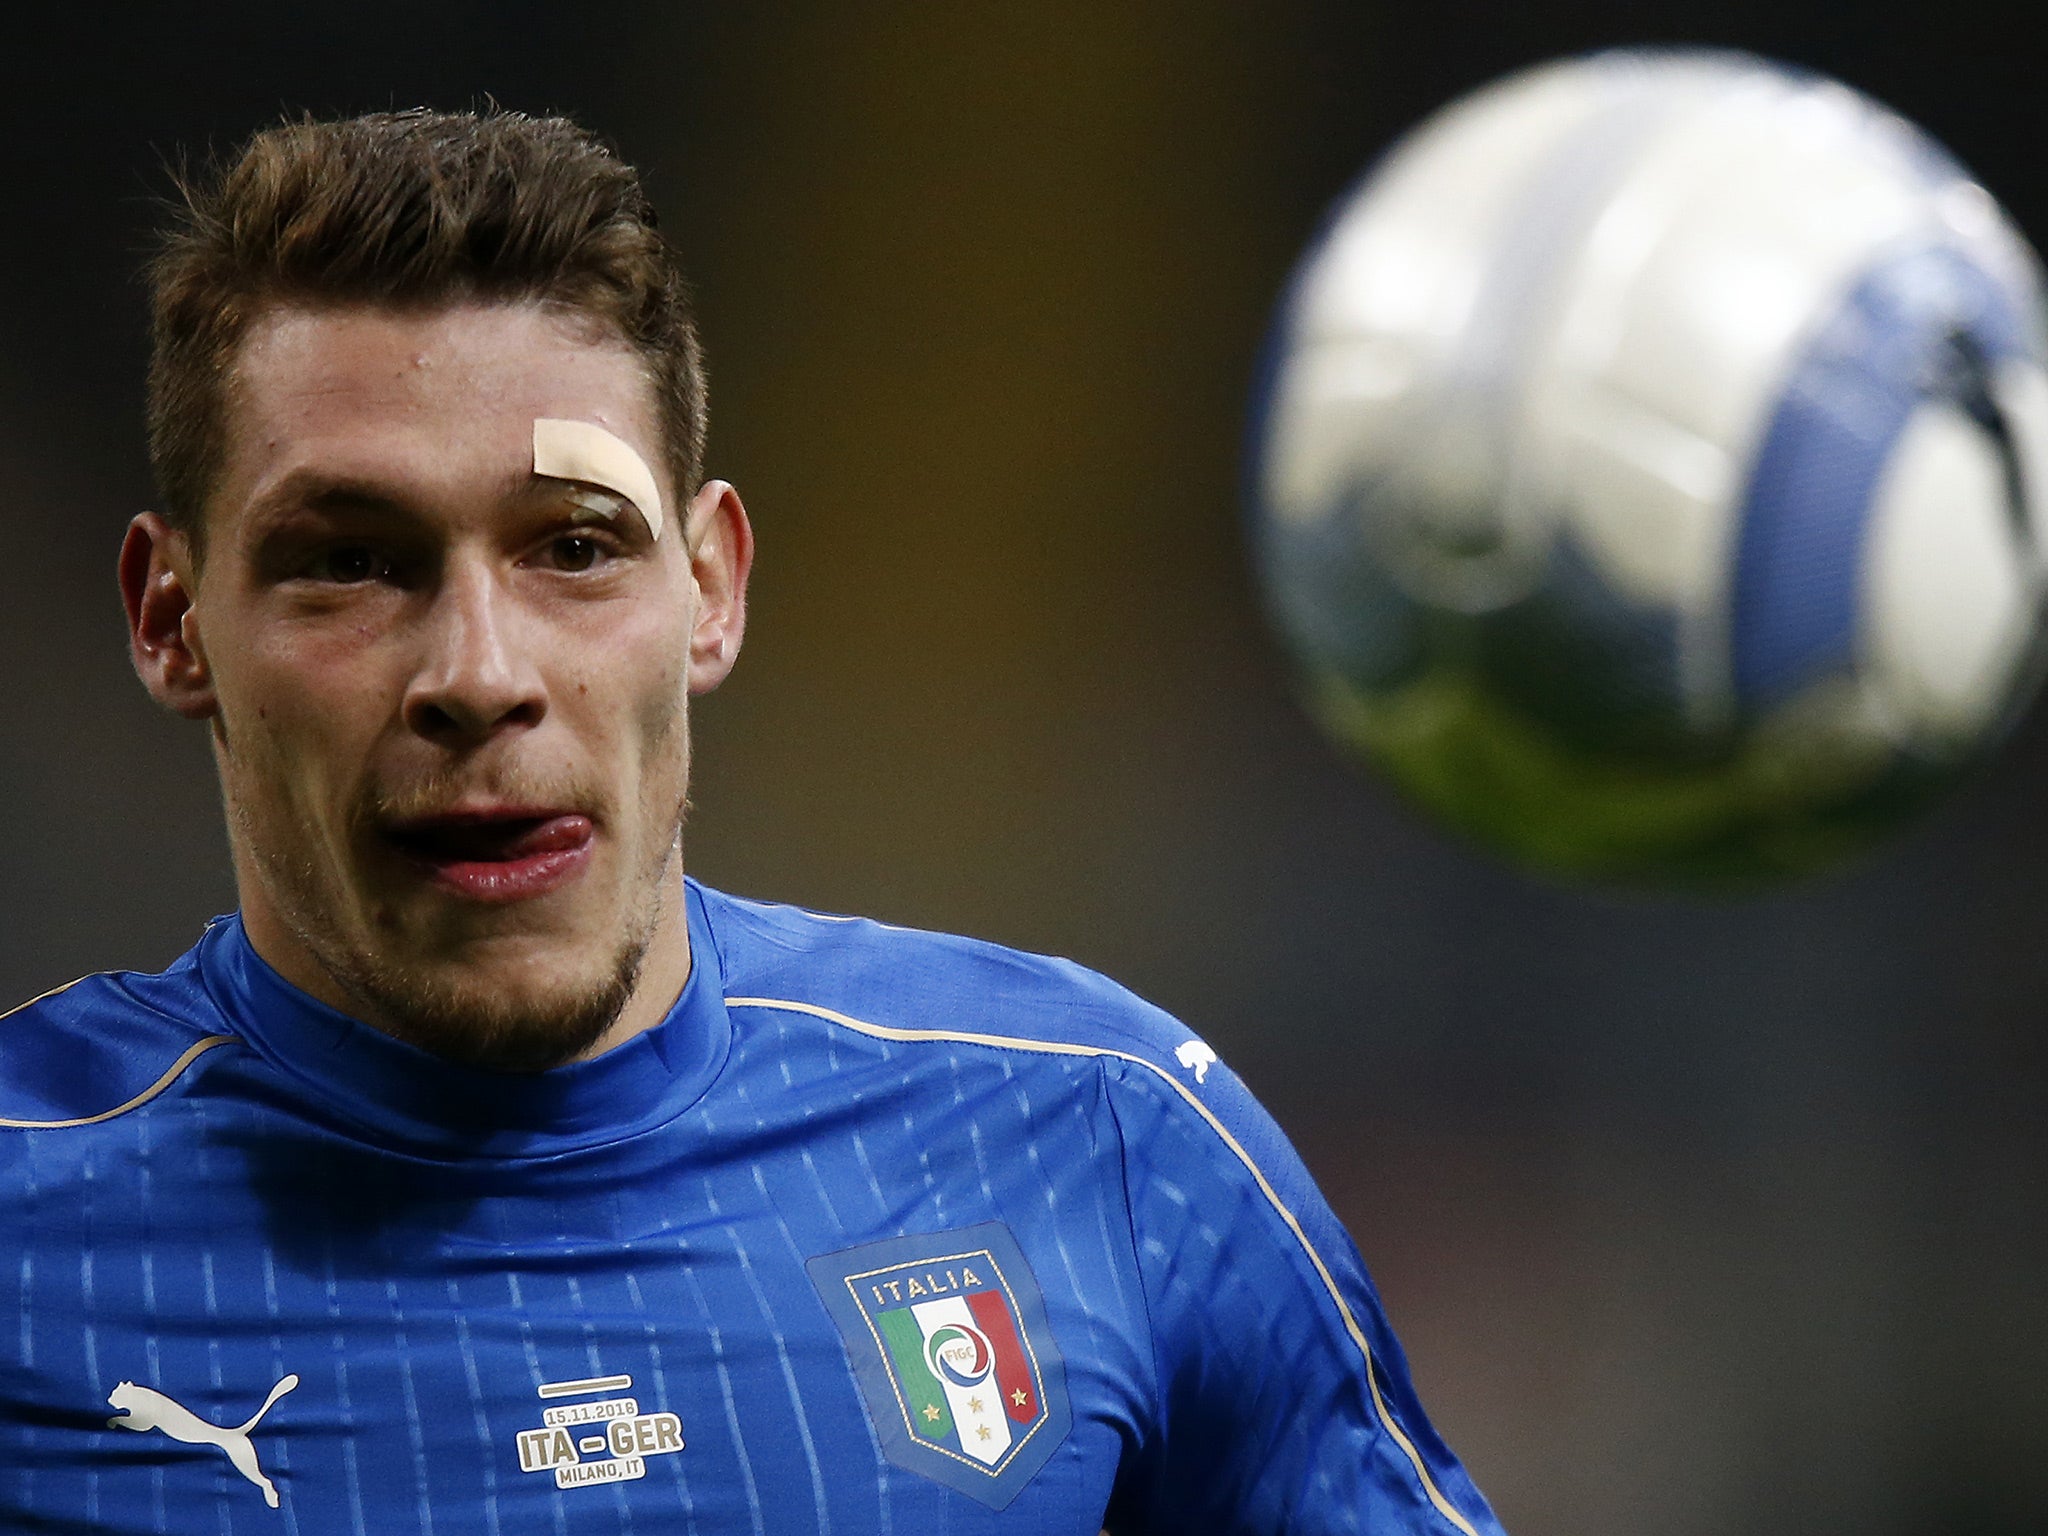 Belotti is a highly-rated young striker who has won five caps for Italy